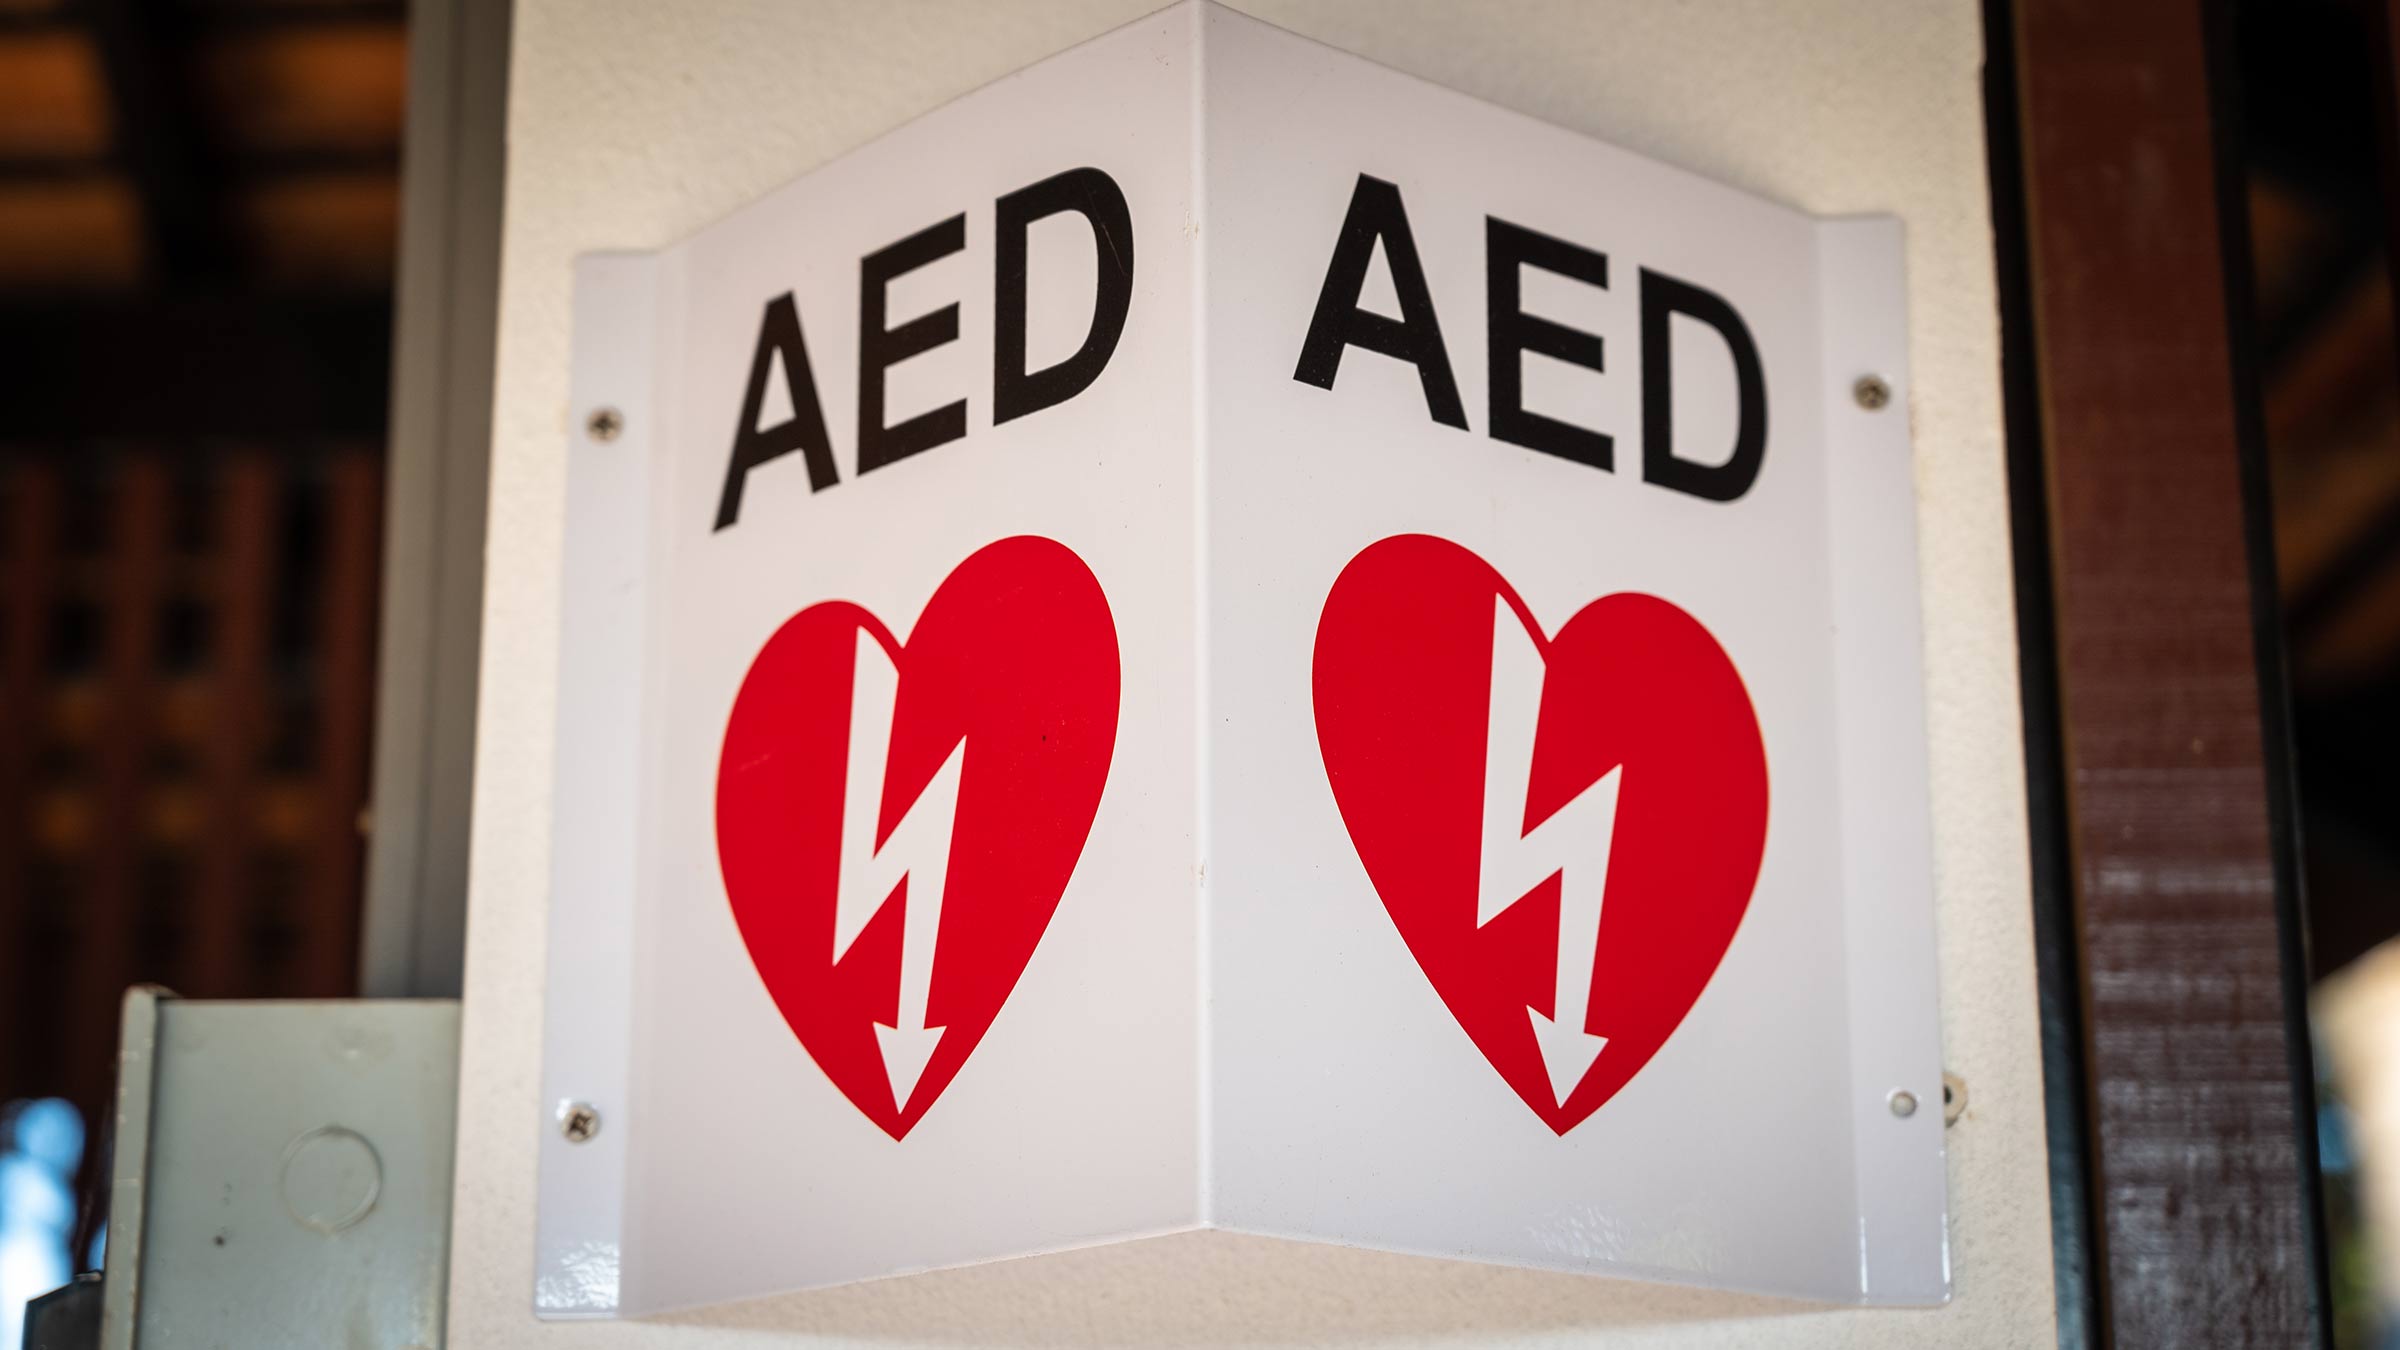 Knowing where an AED is located can save time and lives